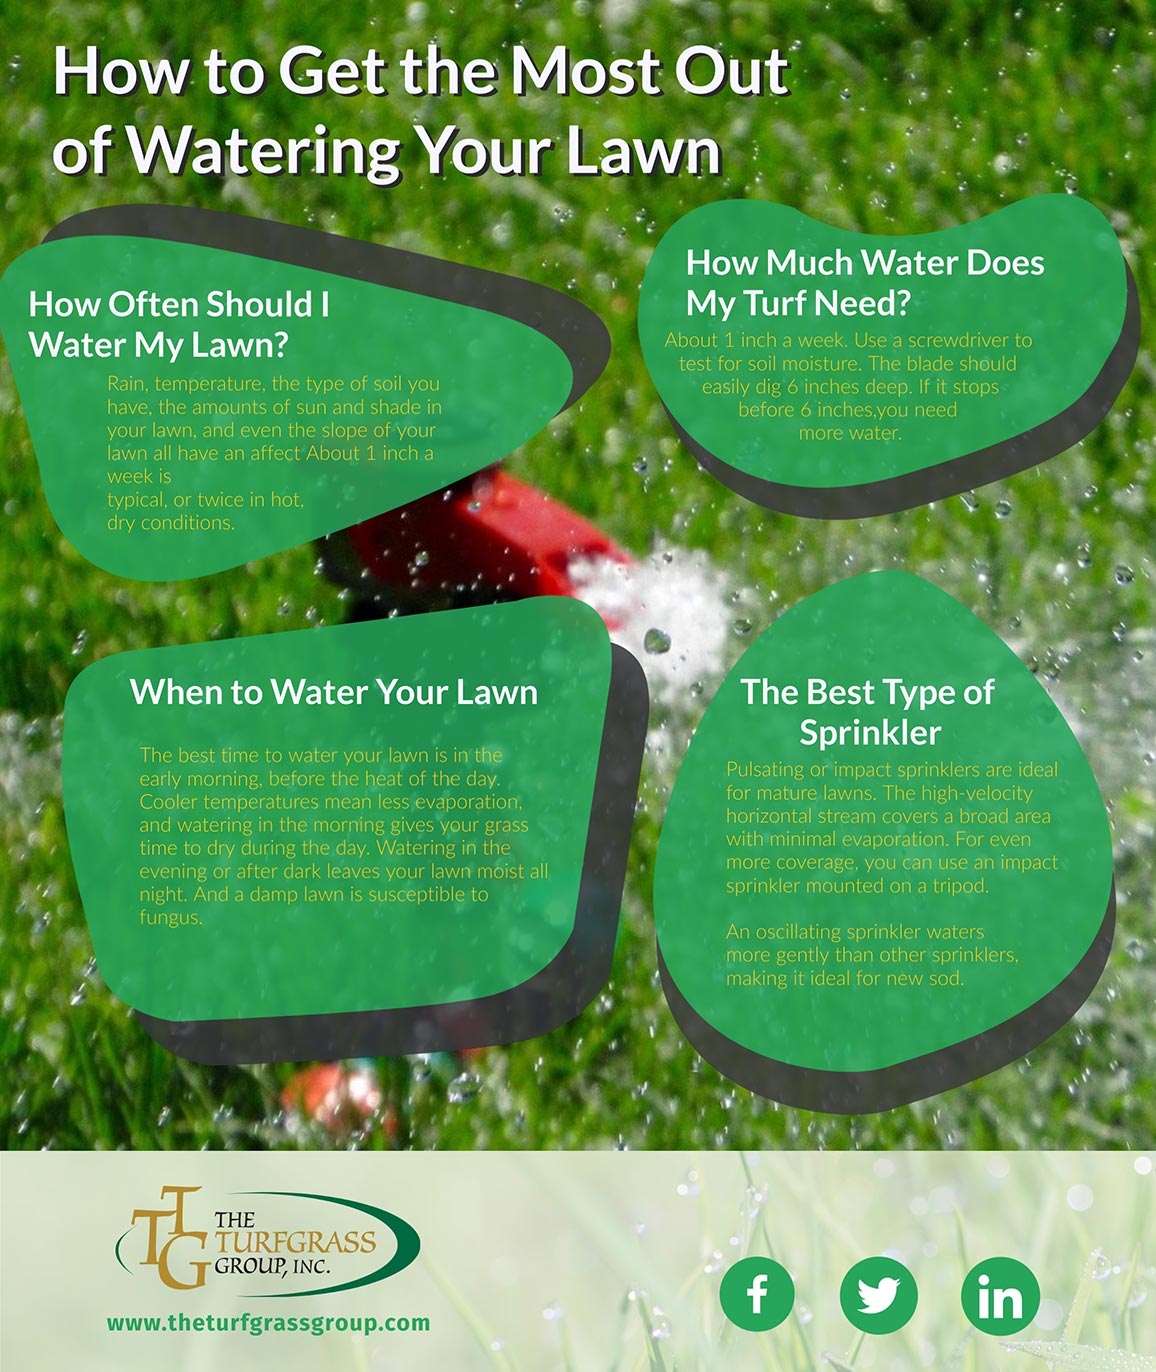 How to Get the Most Out of Watering Your Lawn